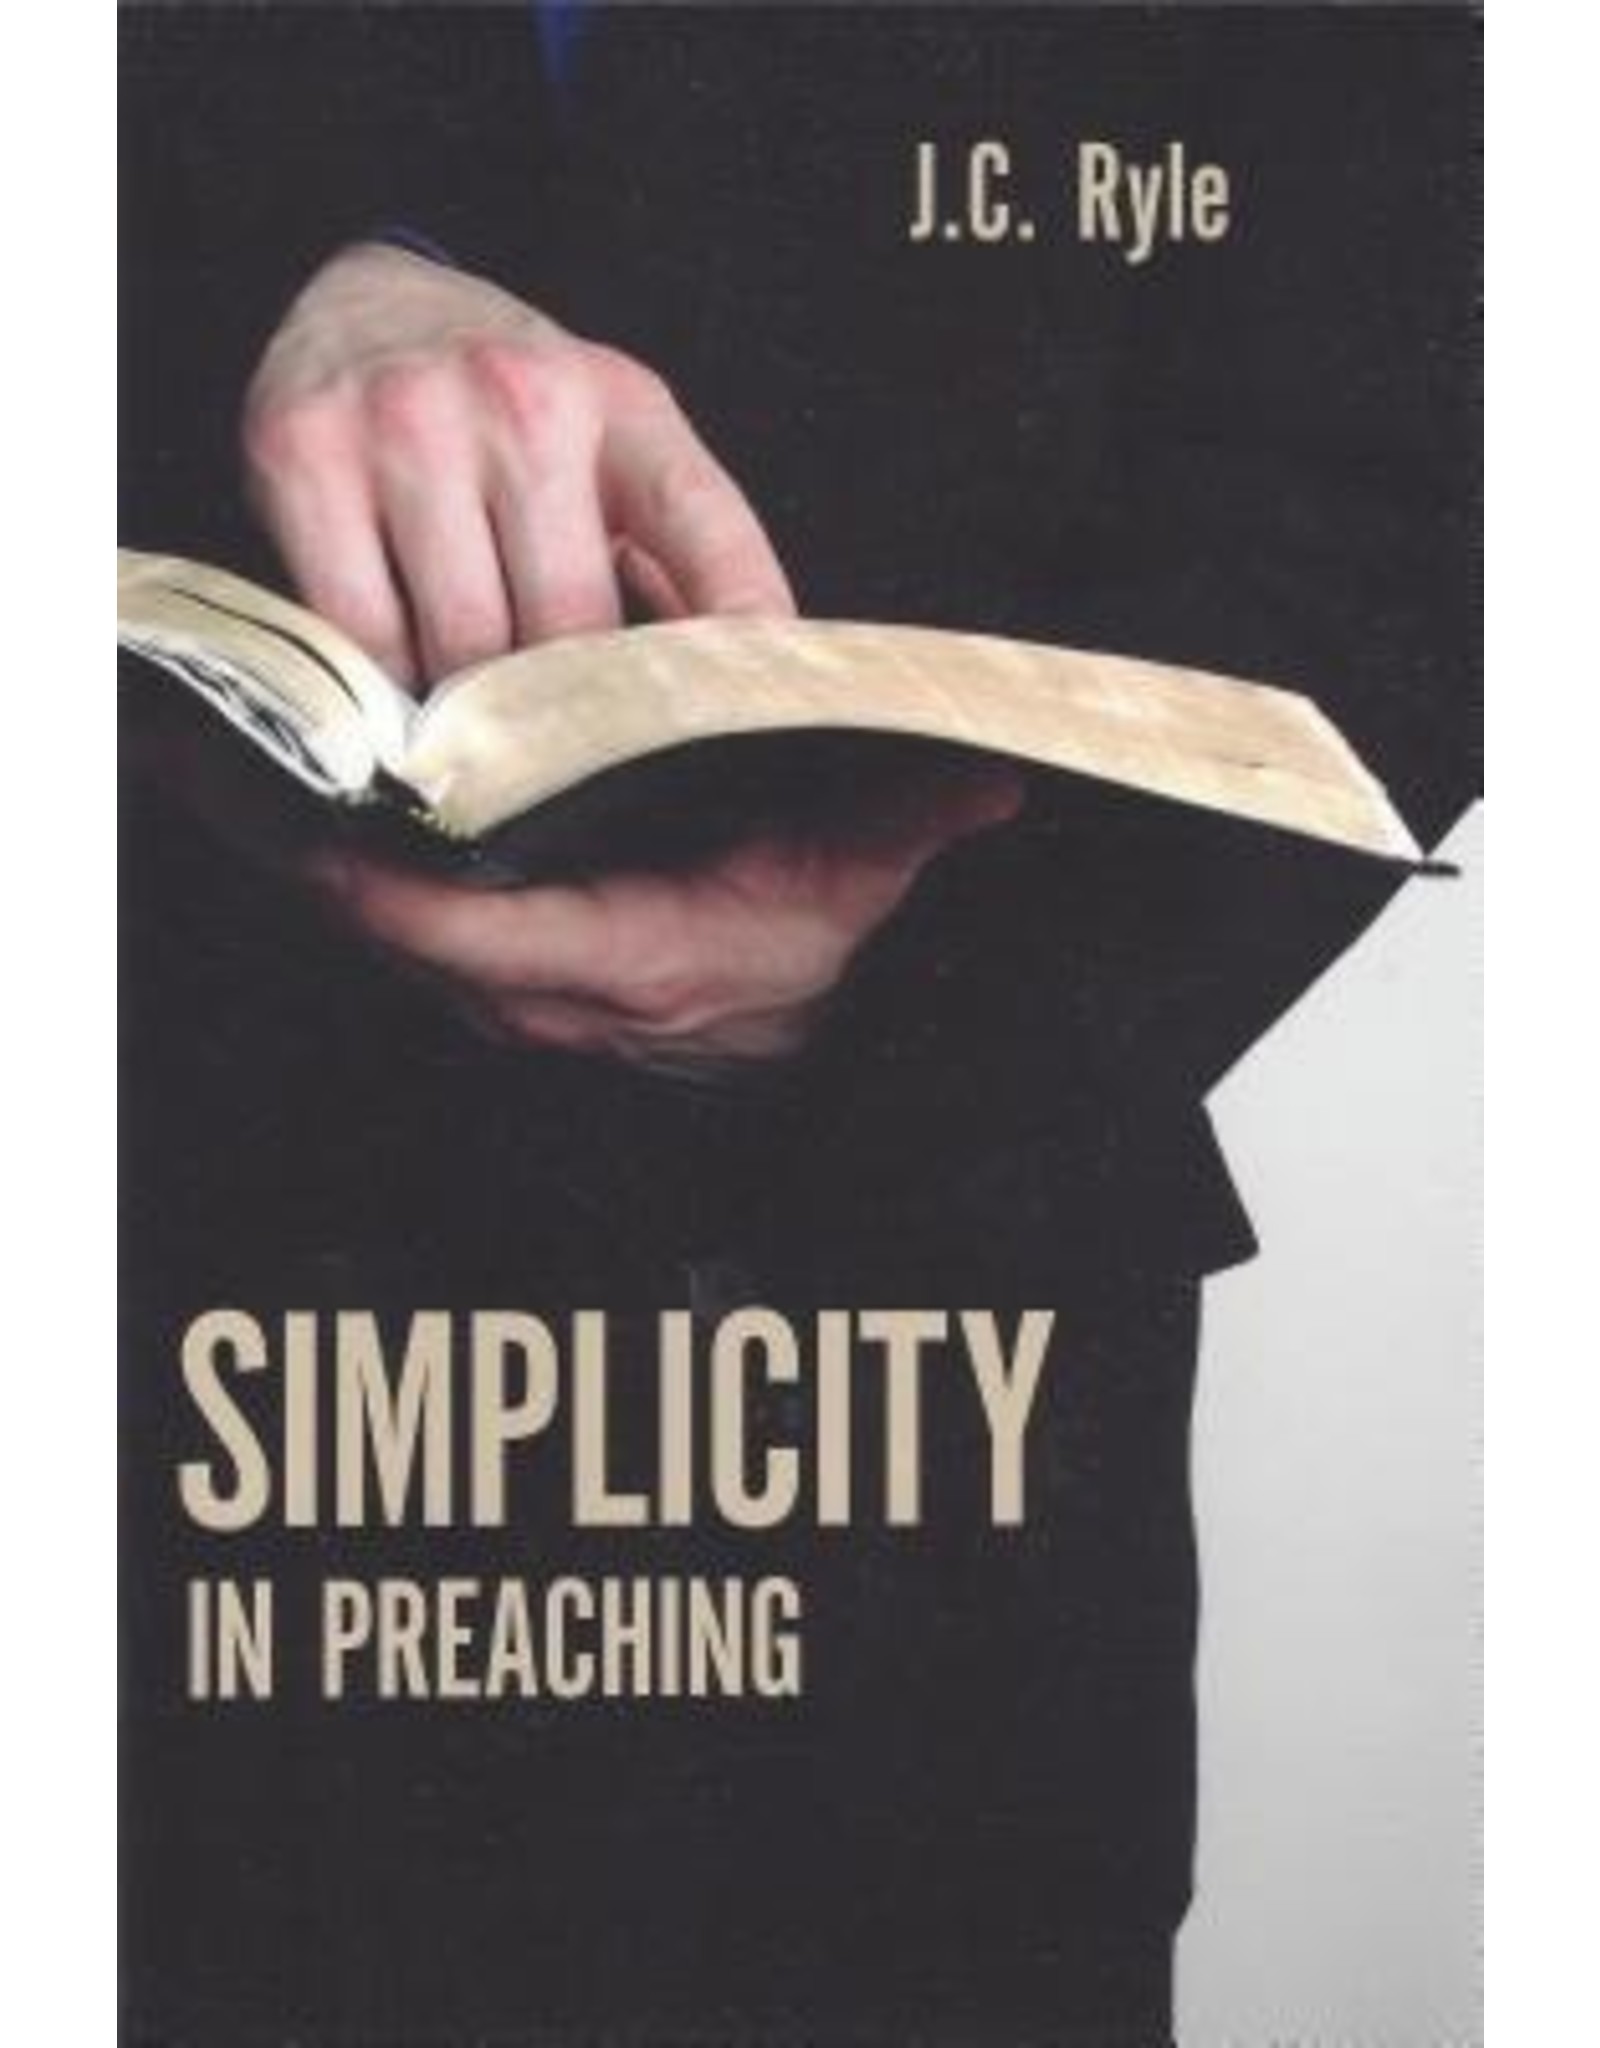 Simplicity in Preaching